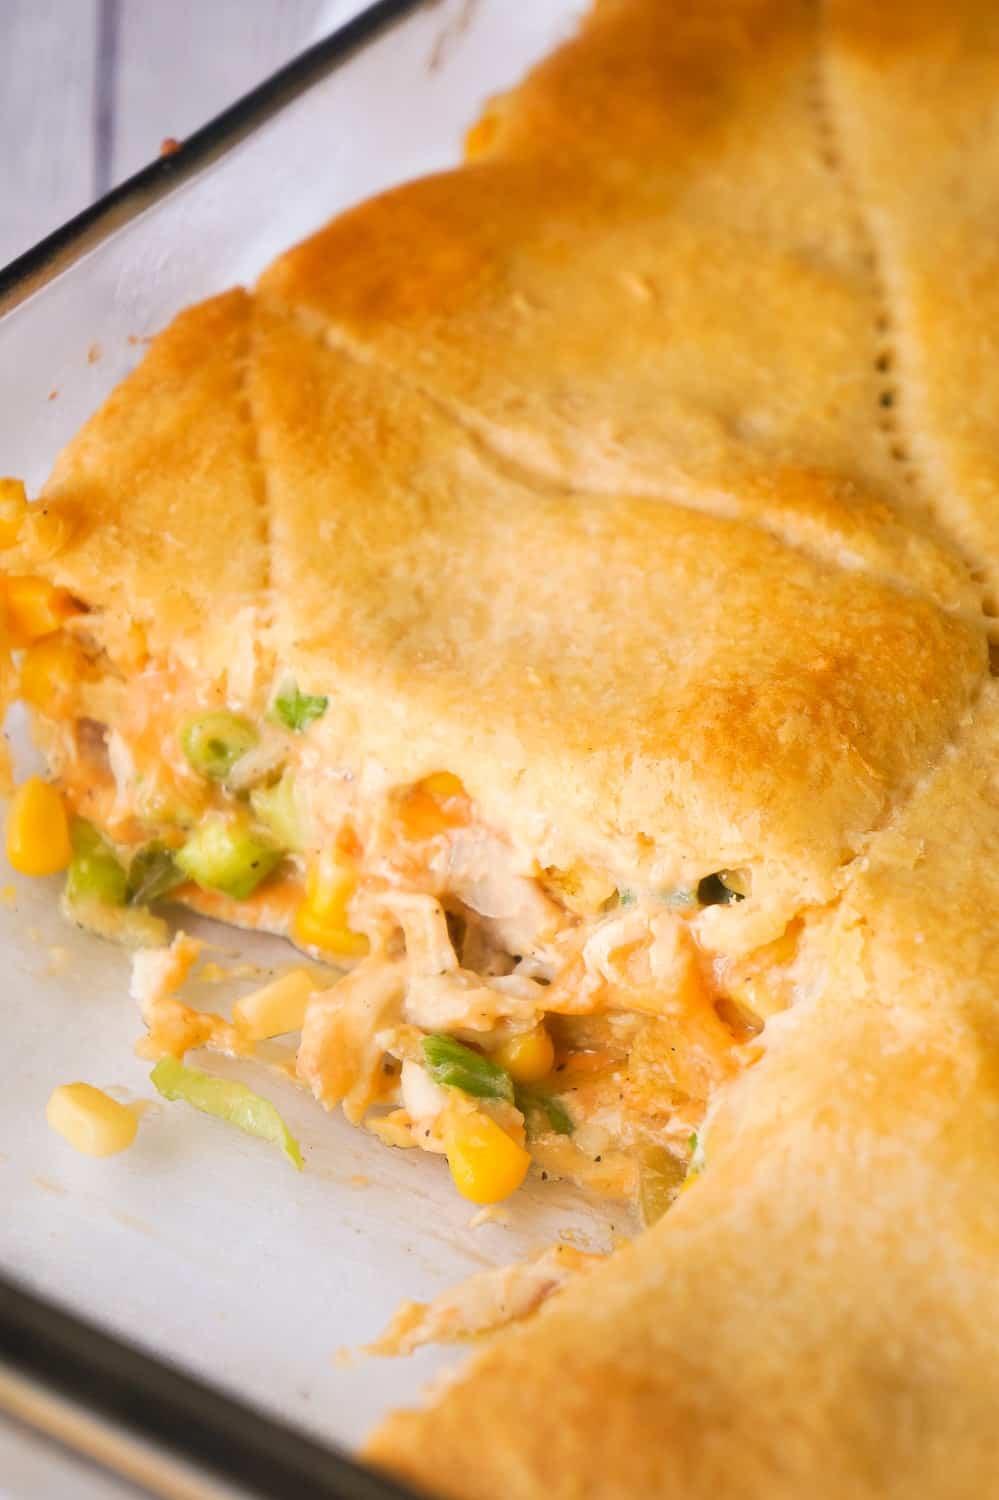 Fritos Chicken Casserole is an easy dinner recipe using precooked rotisserie chicken. This delicious casserole is loaded with shredded chicken, corn chips, green chiles and cheddar cheese then topped with Pillsbury Crescent Roll dough.